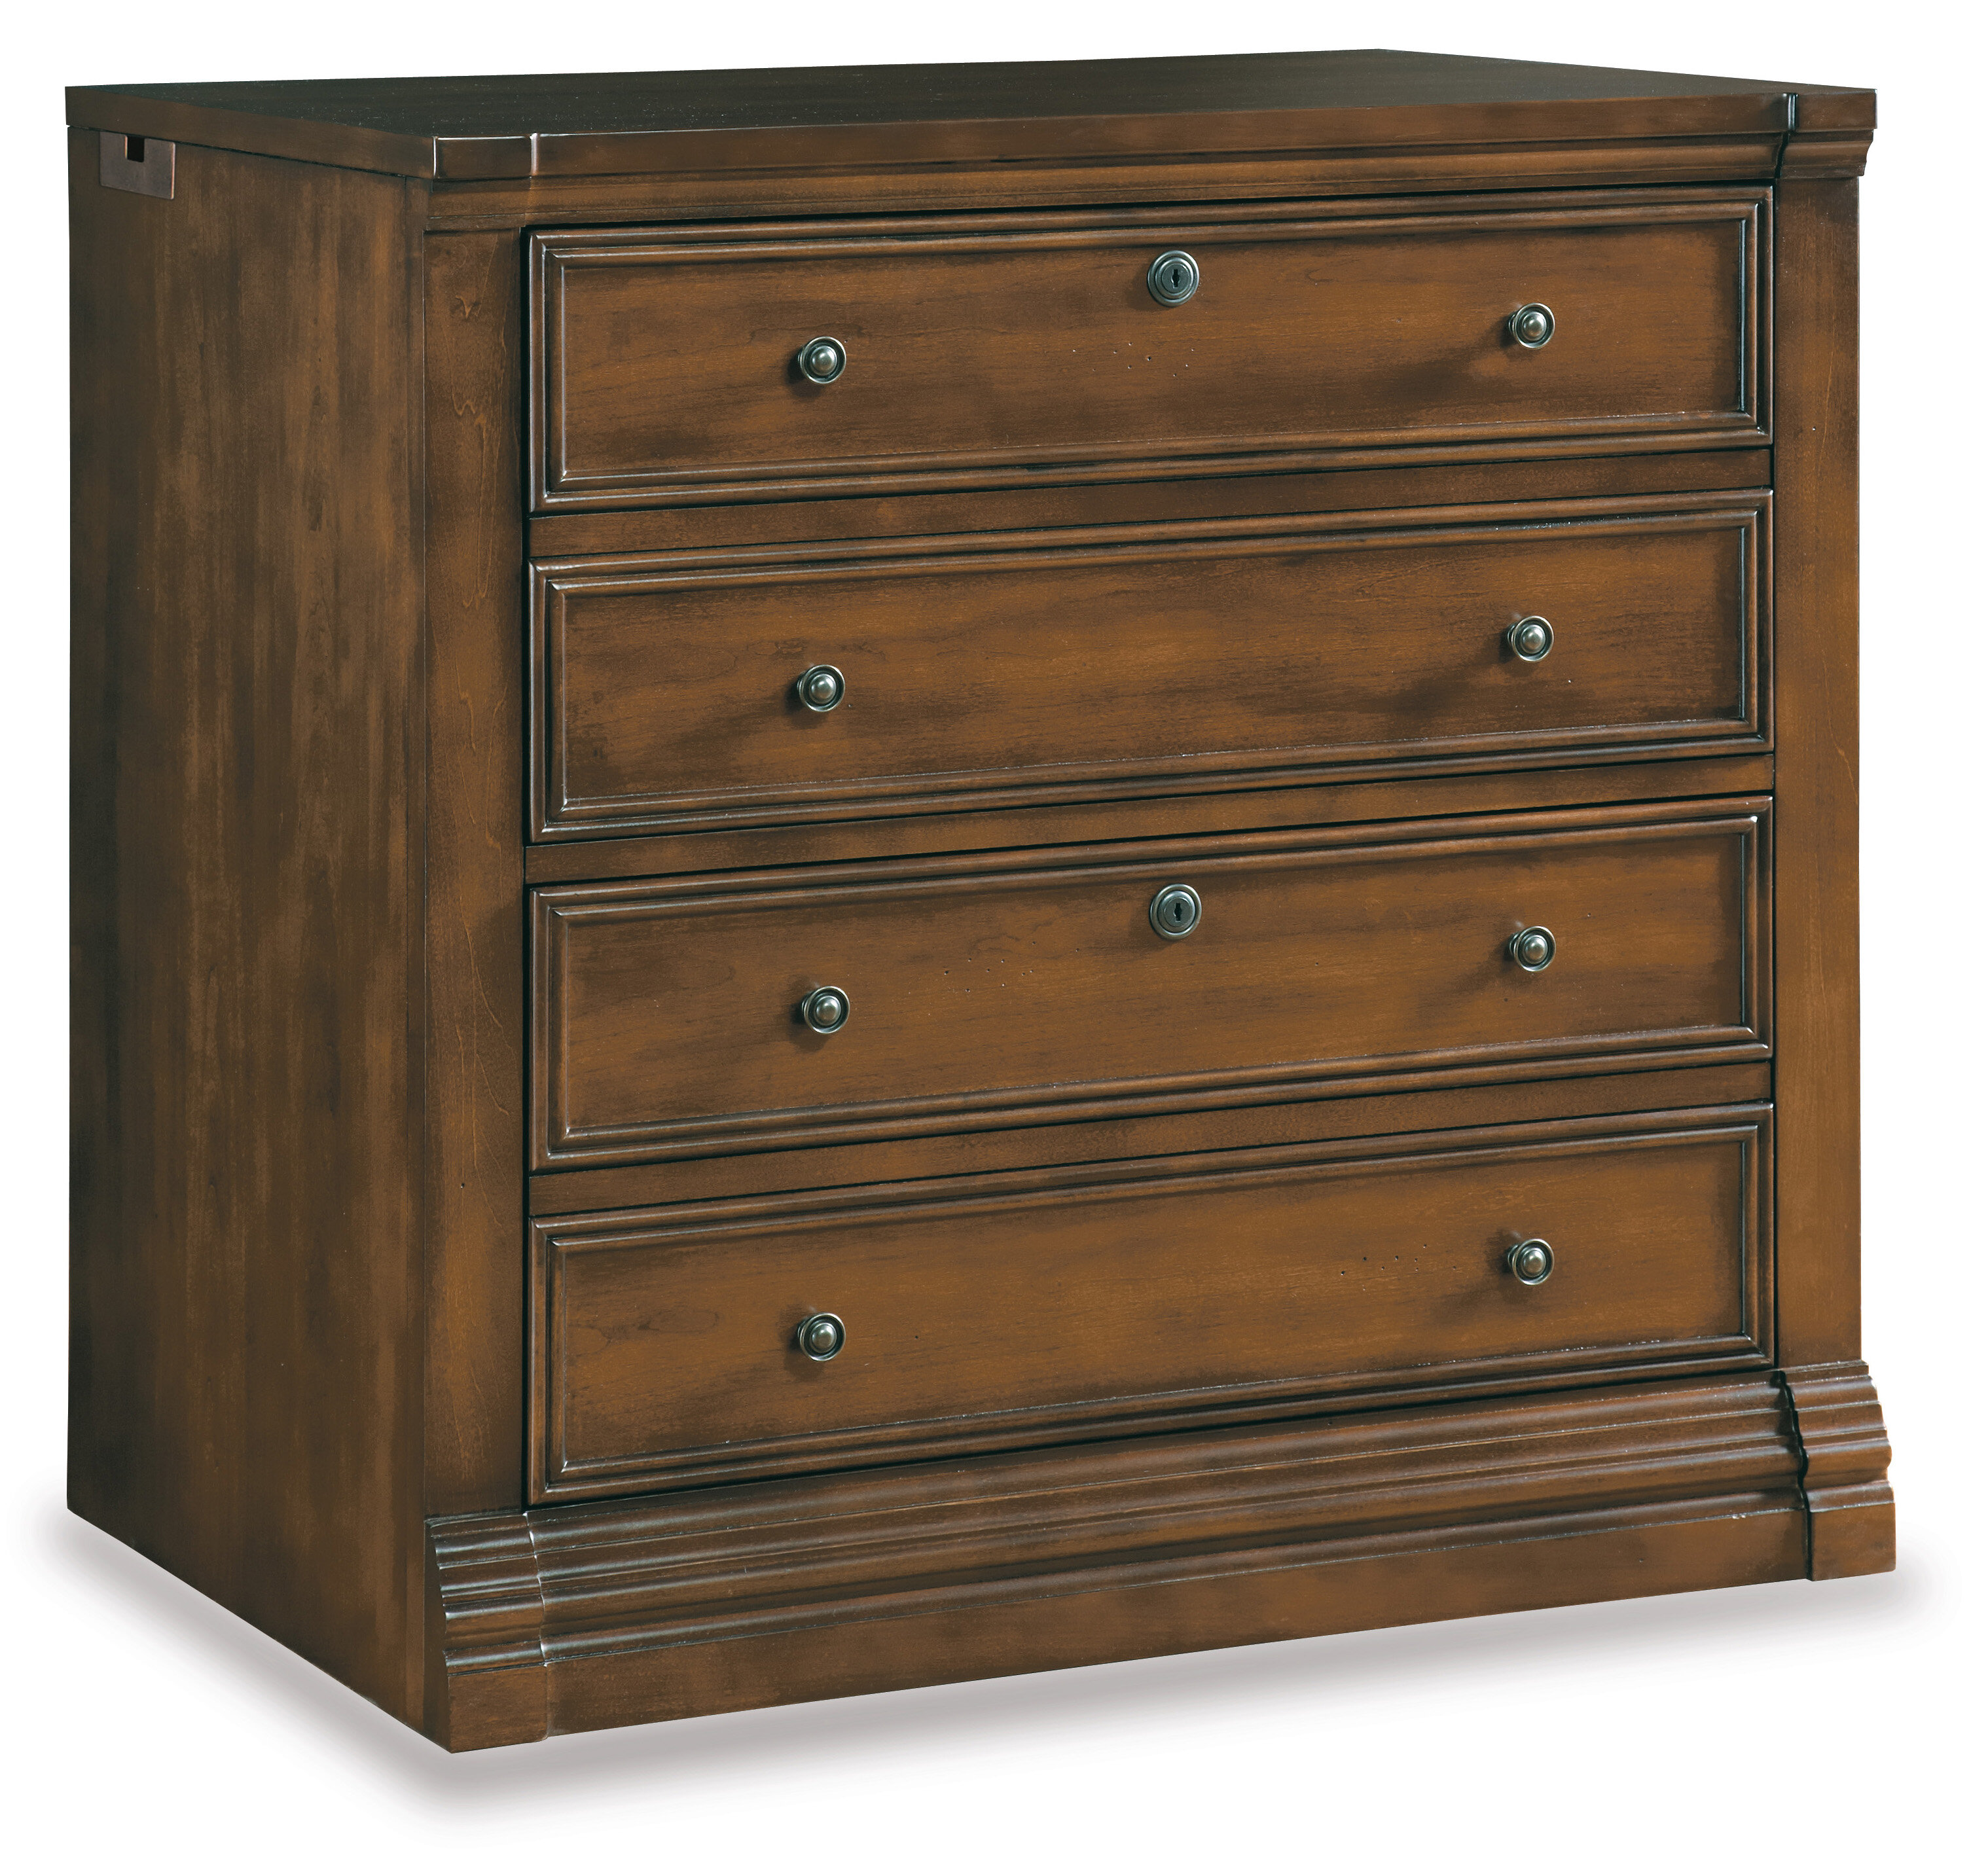 Hooker Furniture Cherry Creek 2 Drawer Lateral Filing Cabinet